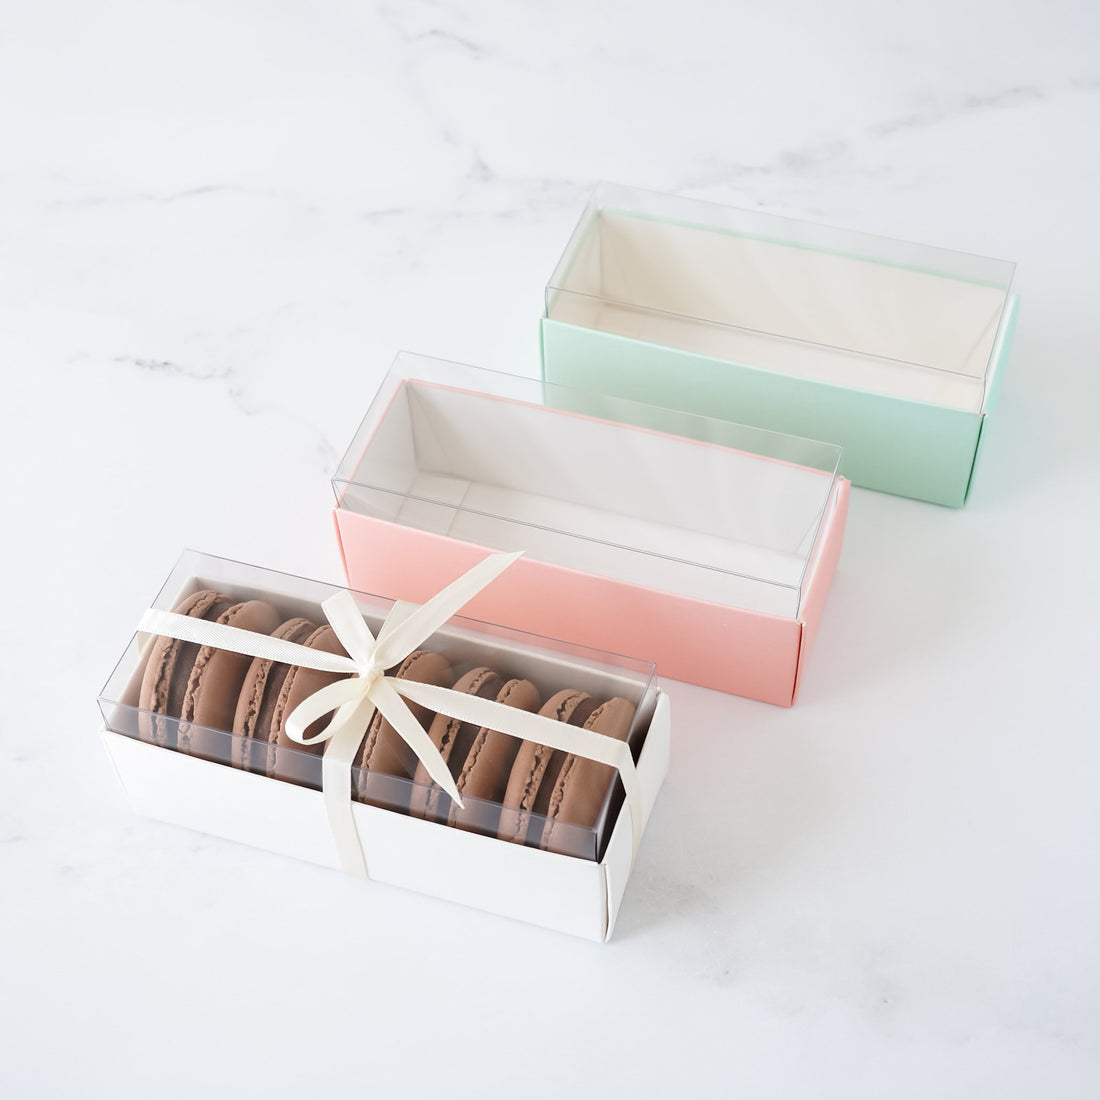 mini macaron boxes with clear lids in white, pink, and mint